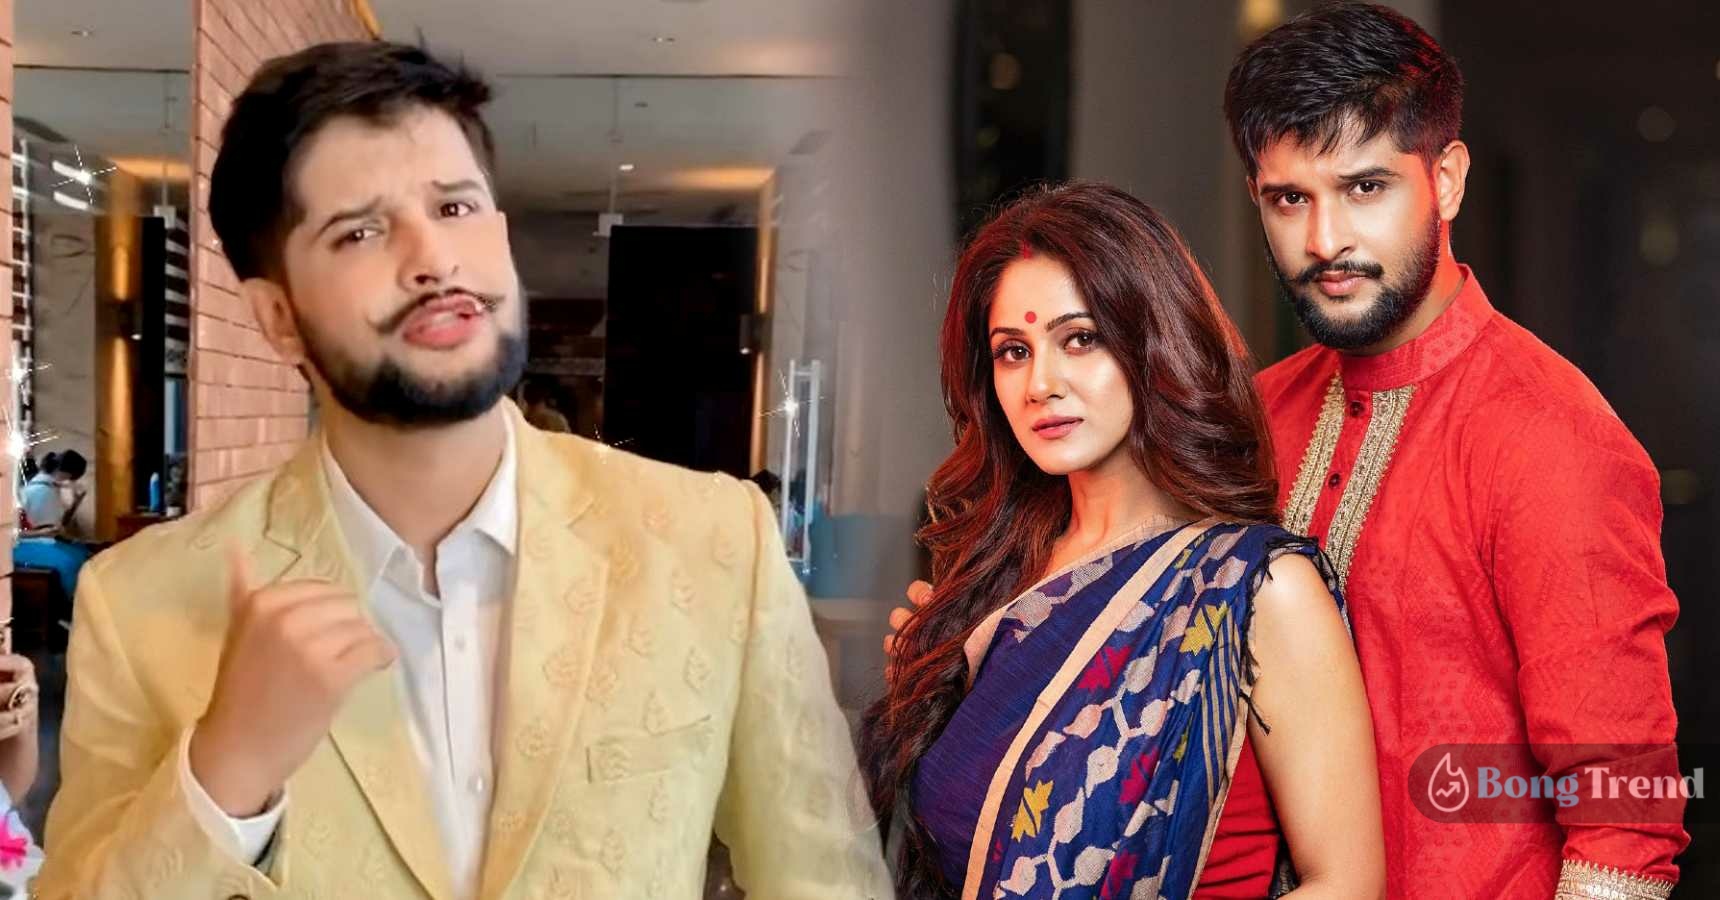 Neel Bhattacharya opens up about rumours on relationship with Trina Saha